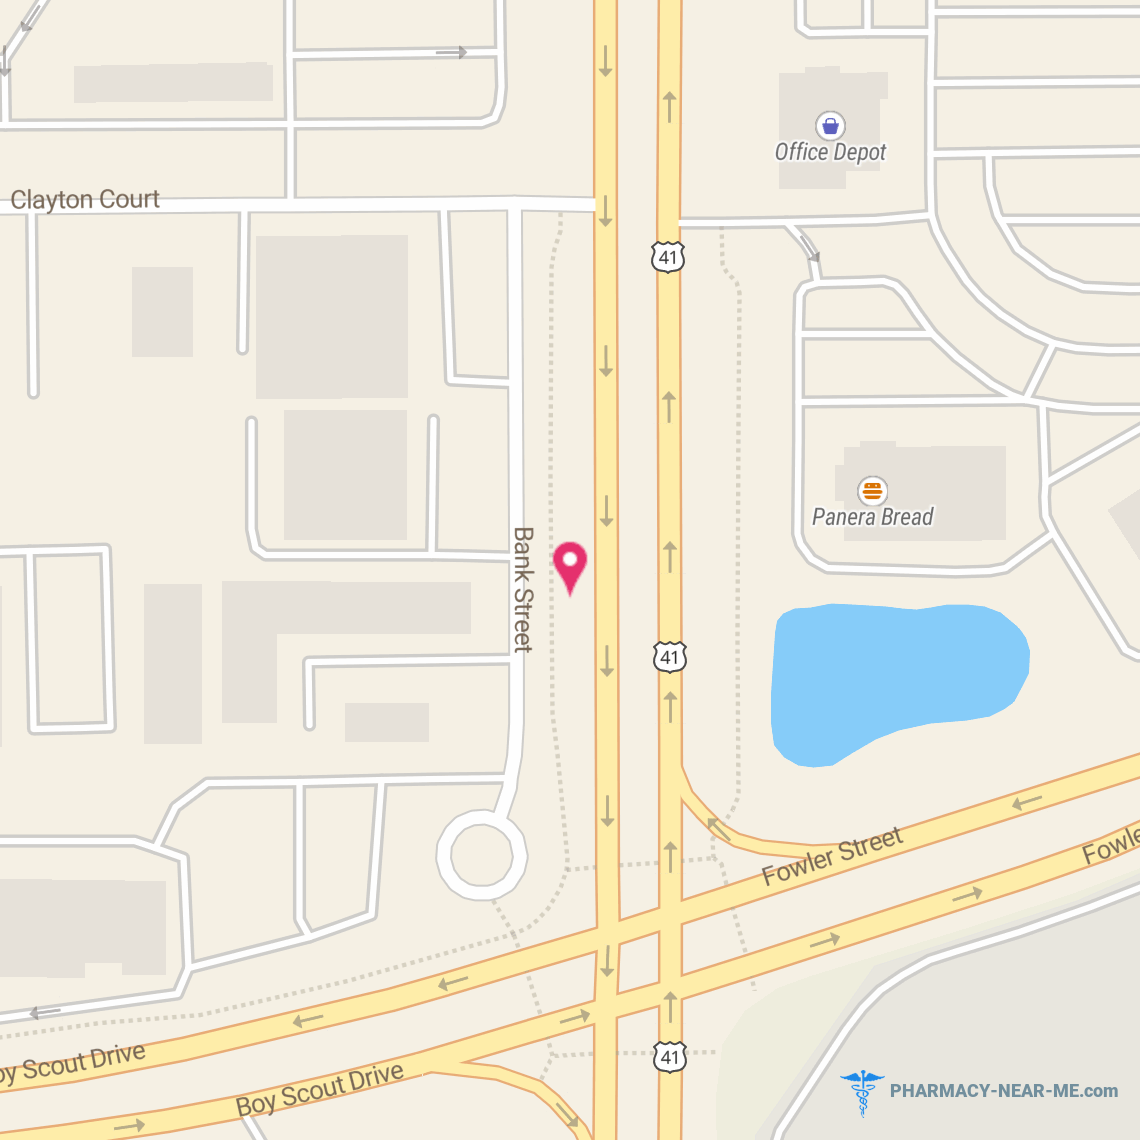 CVS PHARMACY #03616 - Pharmacy Hours, Phone, Reviews & Information: 13400 South Cleveland Avenue, Fort Myers, Florida 33907, United States